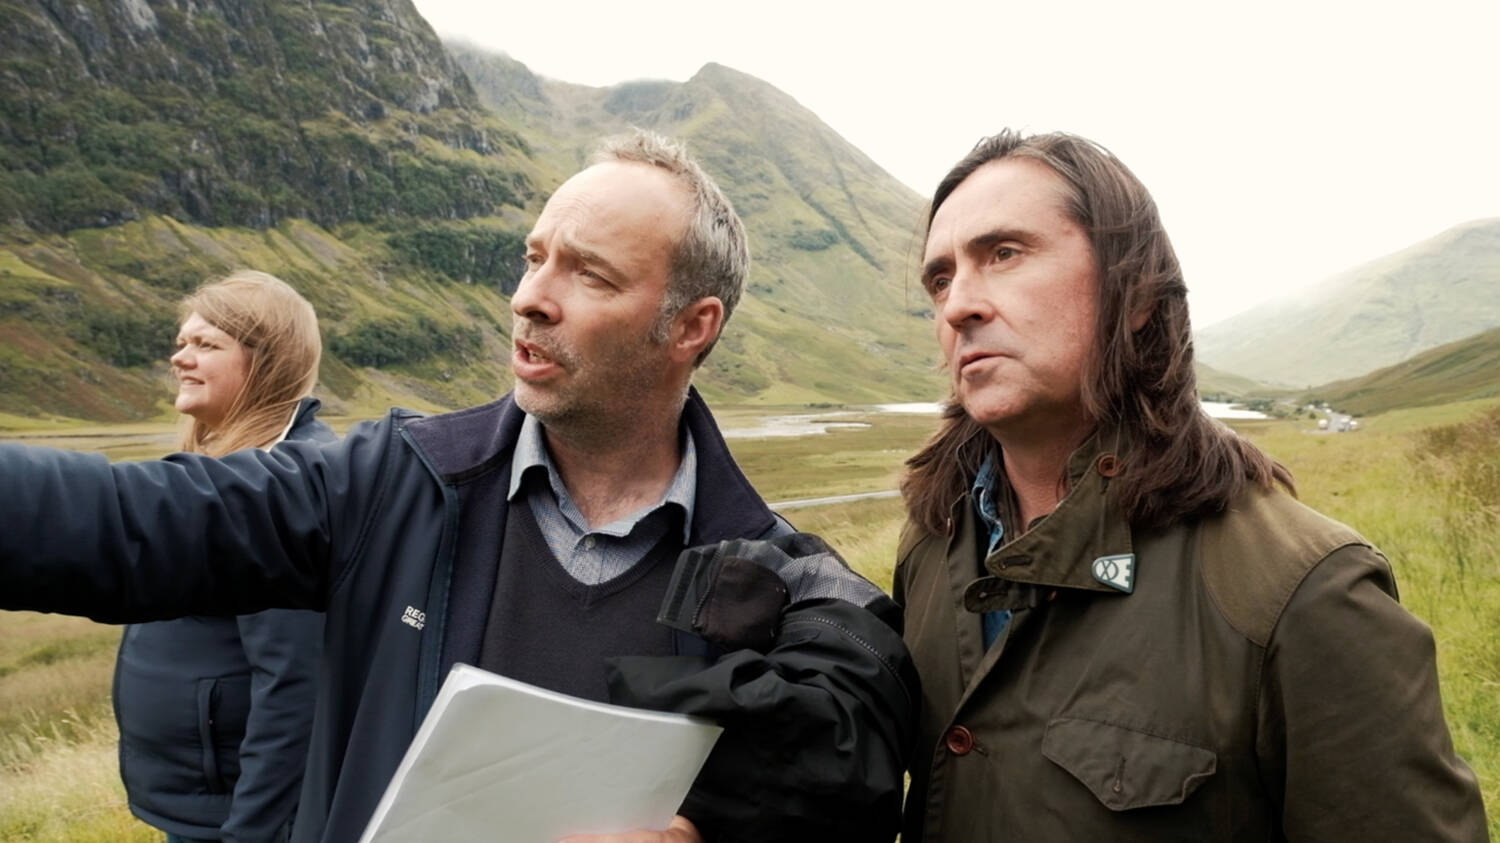 Neil Oliver stands beside Derek Alexander, the Trust's Head of Archaeology, as they both look down the glen at Glencoe. Derek holds some papers under his arm and is pointing ahead of him.